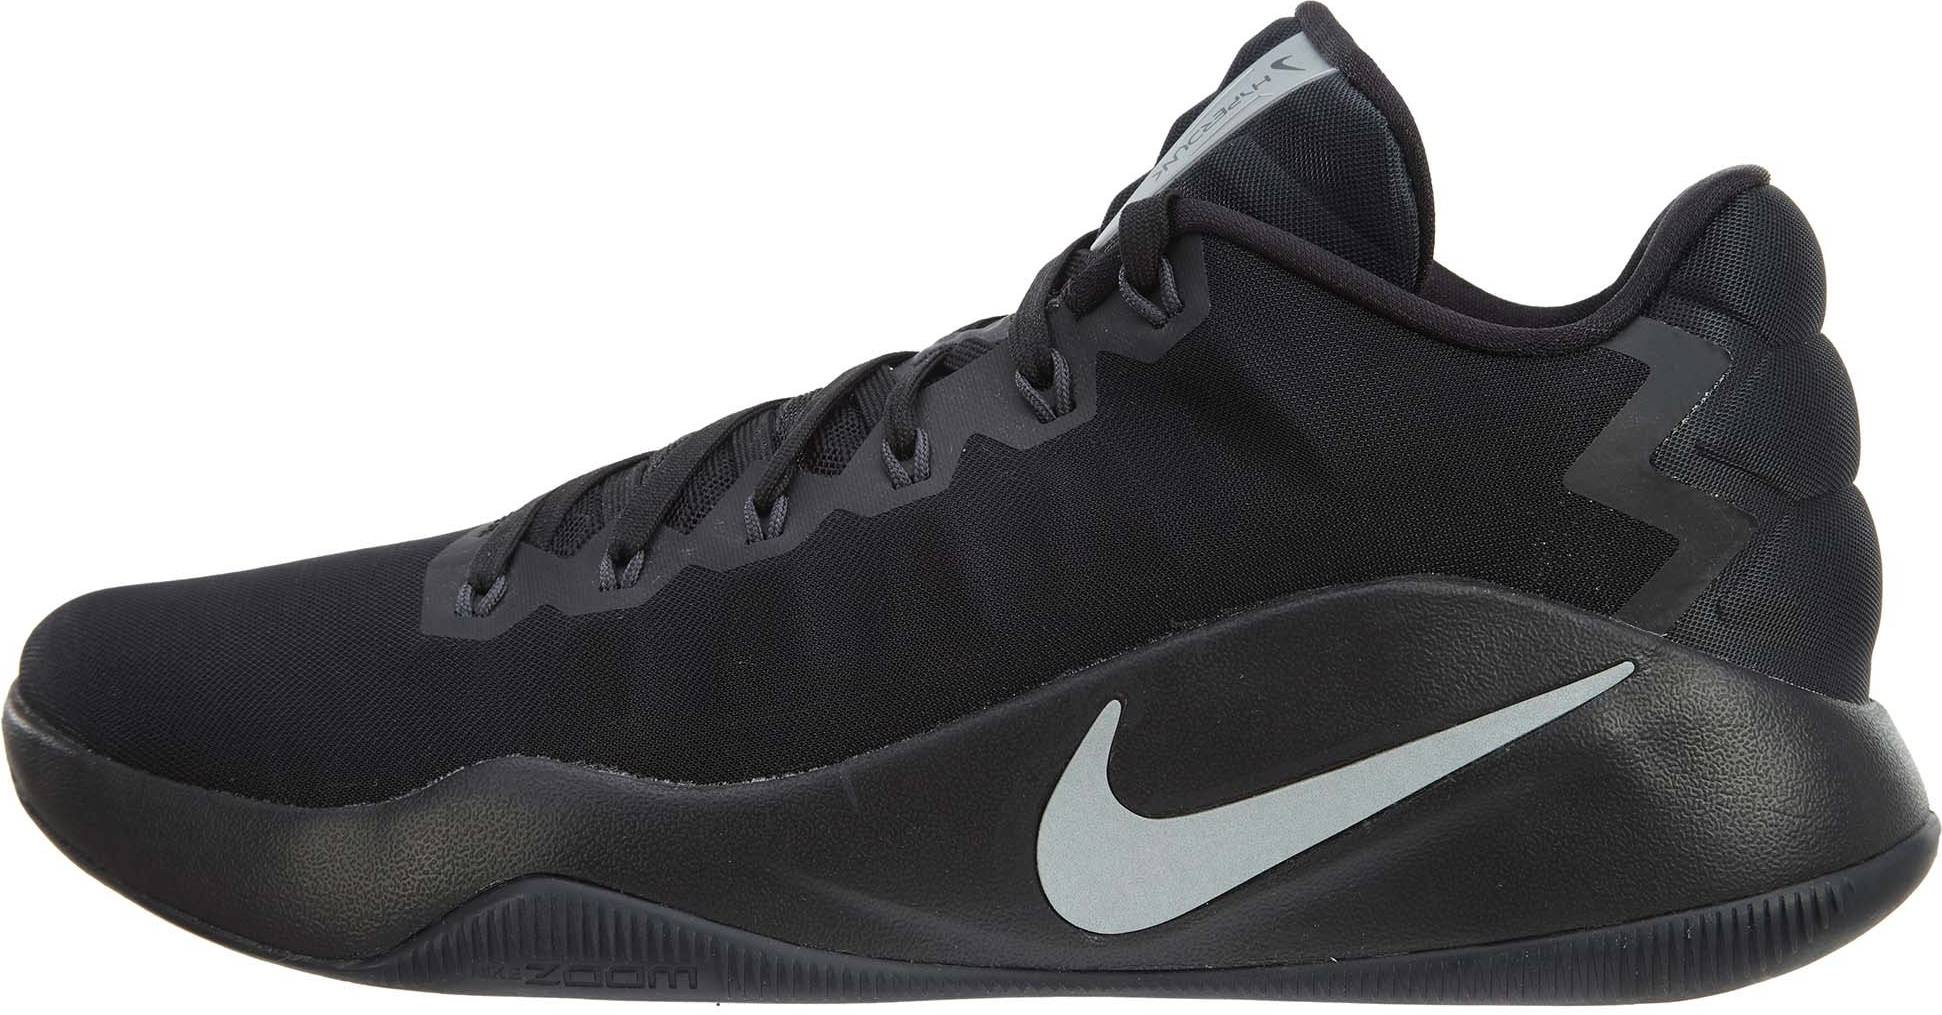 9 Reasons to/NOT to Buy Nike Hyperdunk 2016 Low (Oct 2022) | RunRepeat